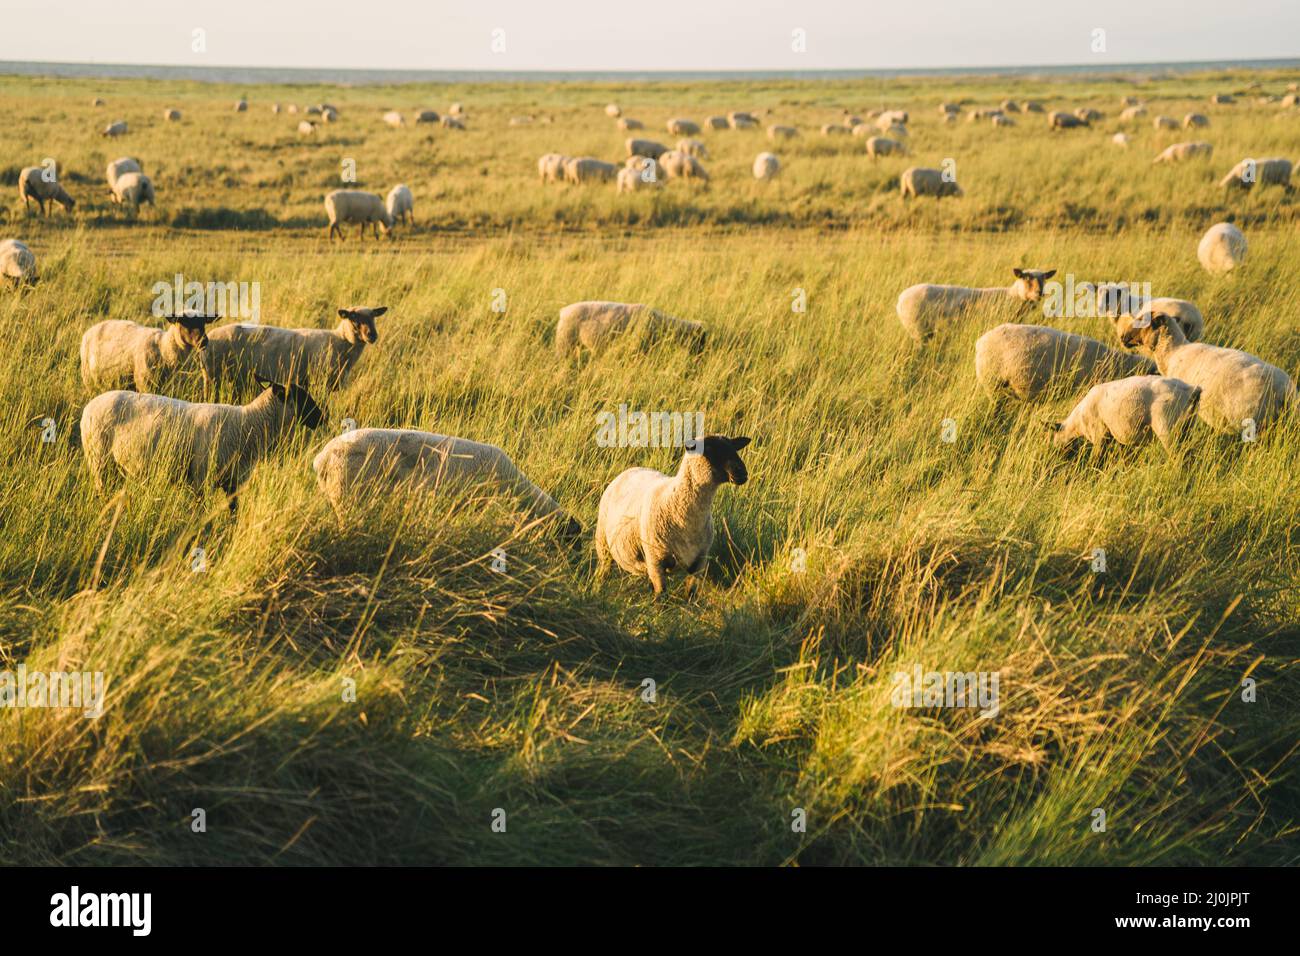 Livestock farming industry north of France, Brittany region. Sheep pasture in field on shores of Atlantic Ocean in French region Stock Photo